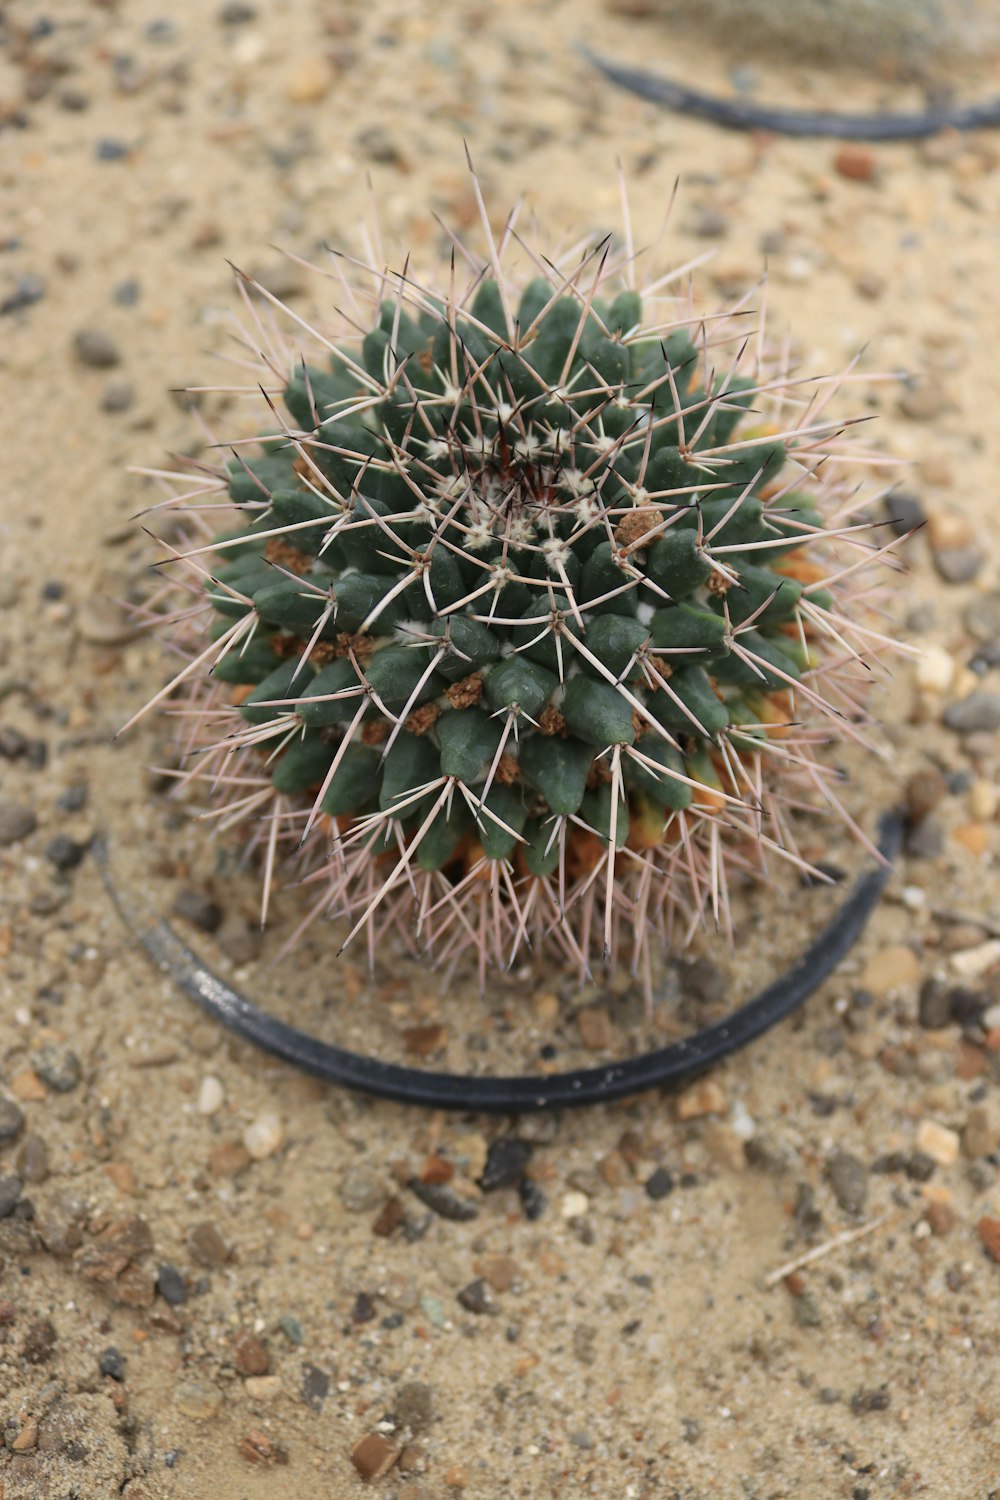 a small cactus in a glass dish on the ground